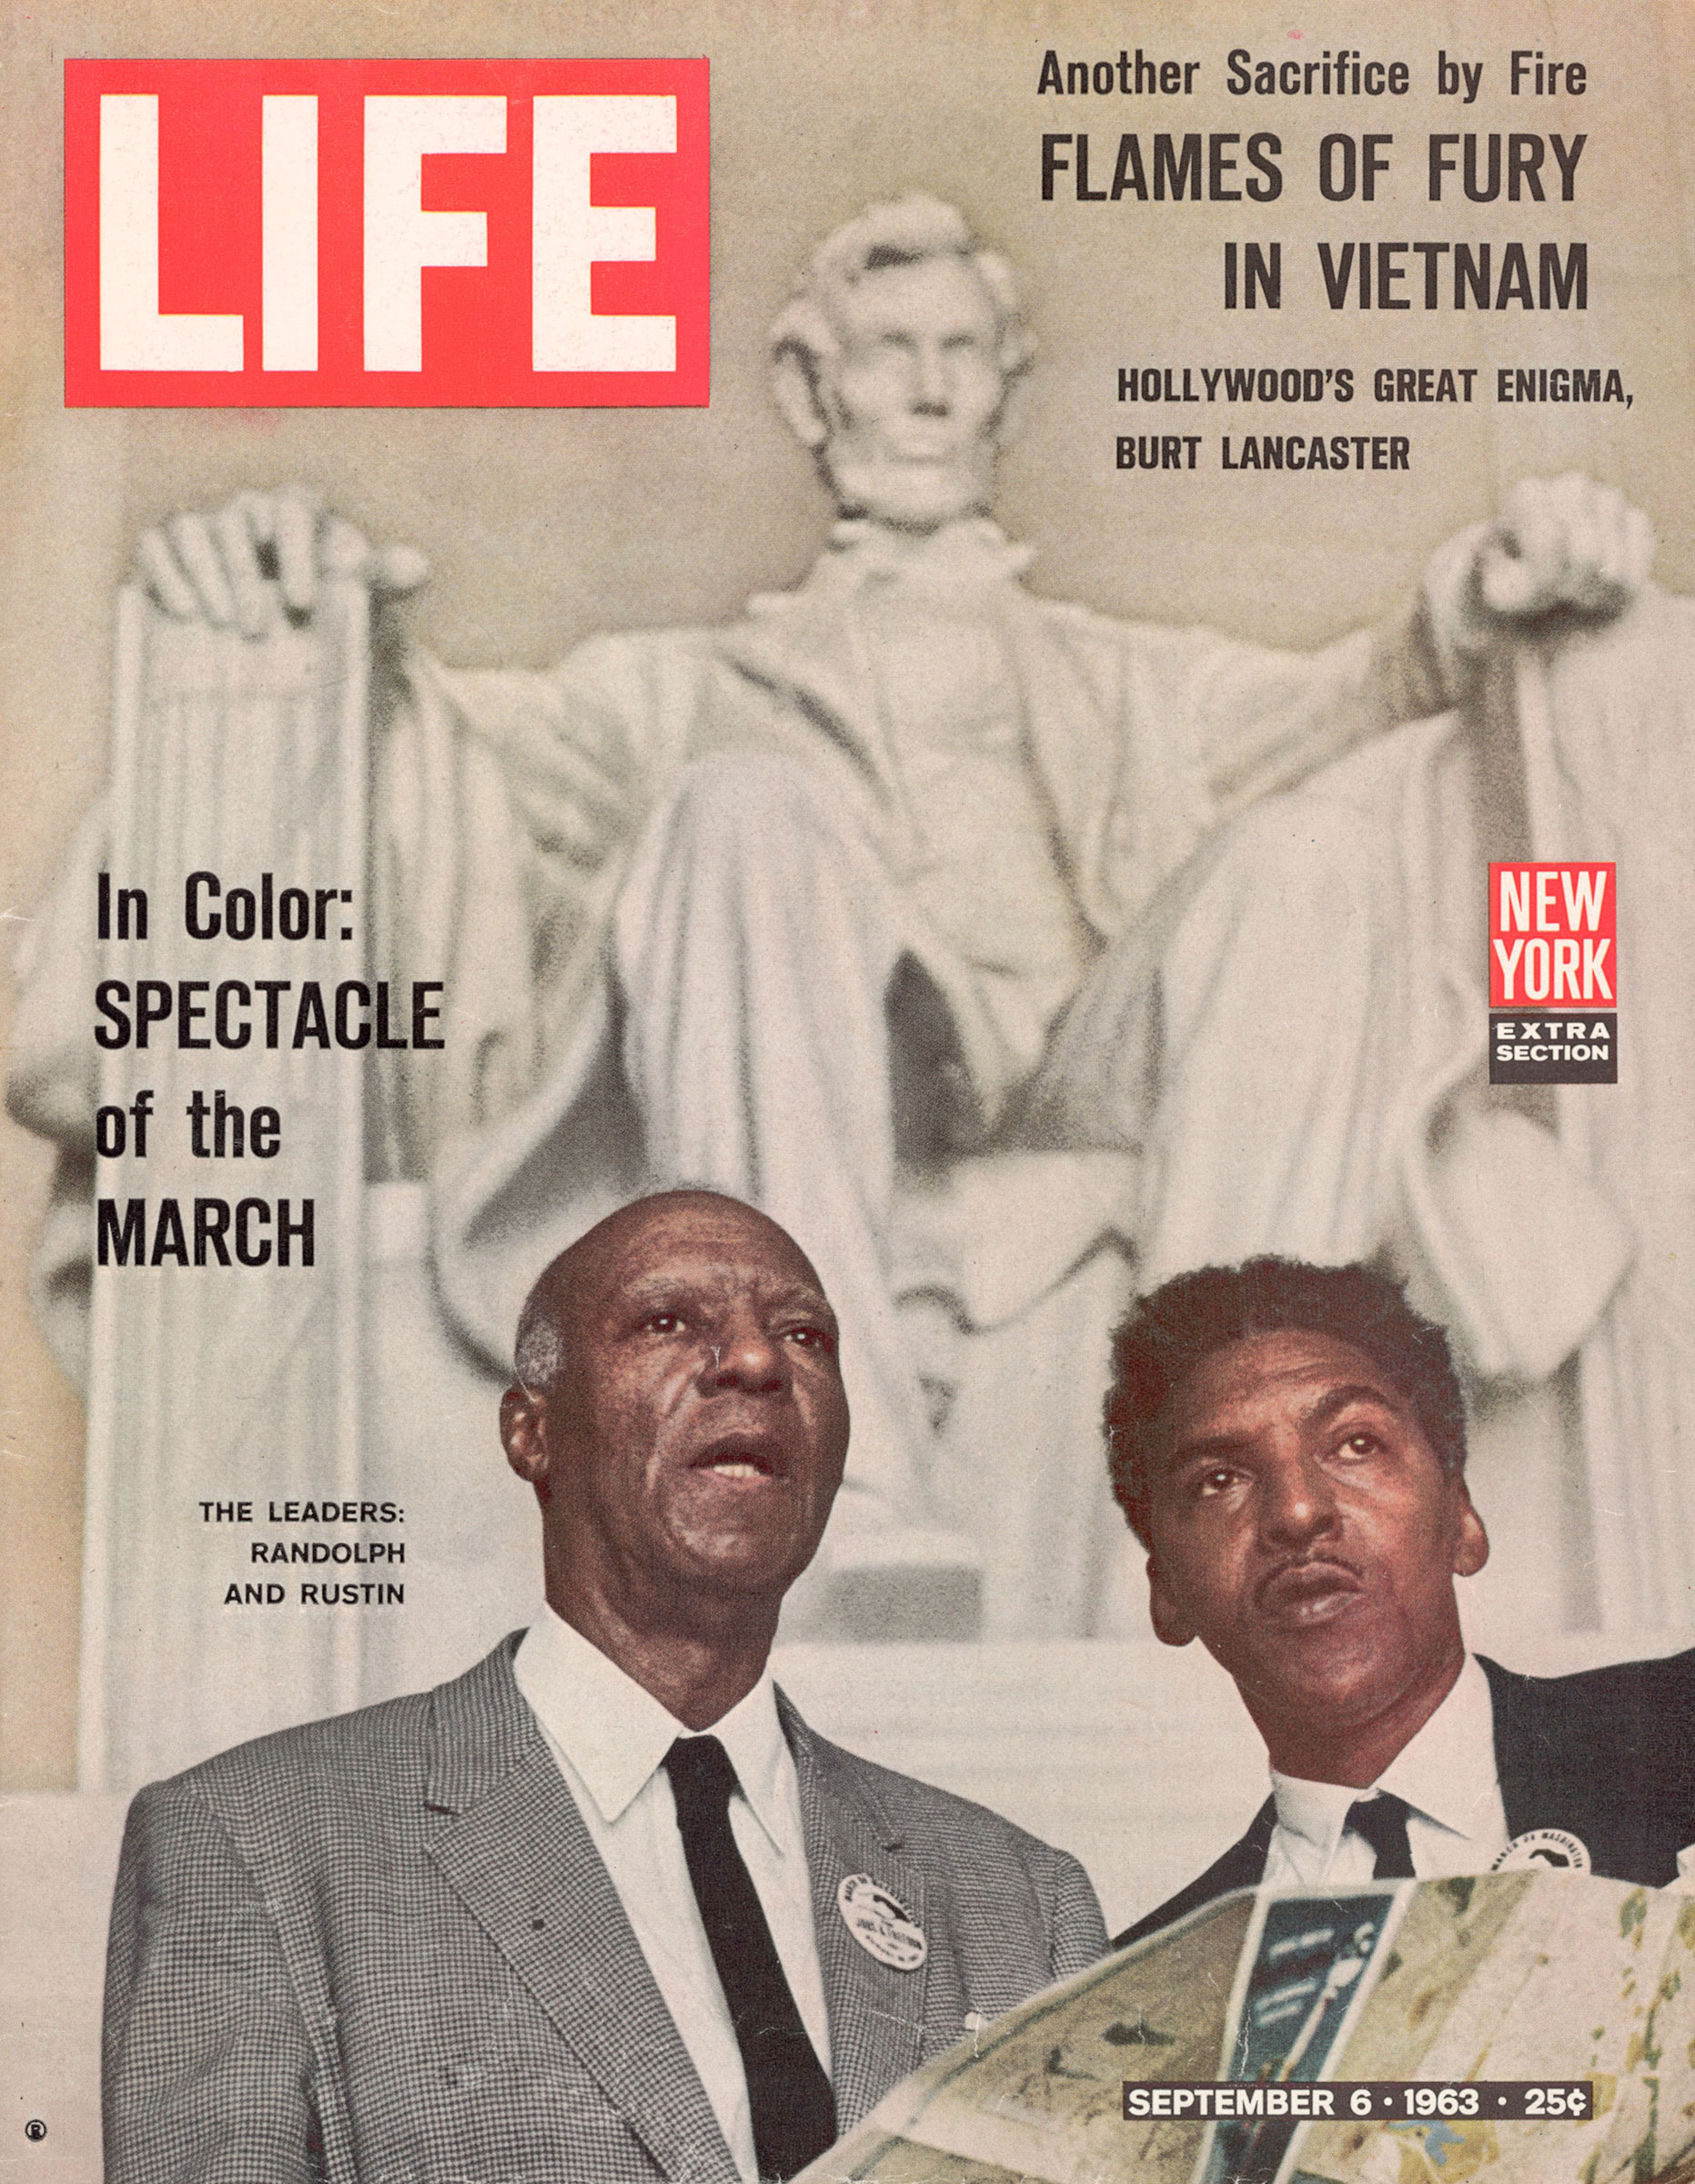 September 6, 1963 cover of LIFE showing A. Phillip Randolph and Bayard Rustin, organizers of the March on Washington For Jobs and Freedom, aka the Freedom March, stand in front of the Lincoln Memorial.